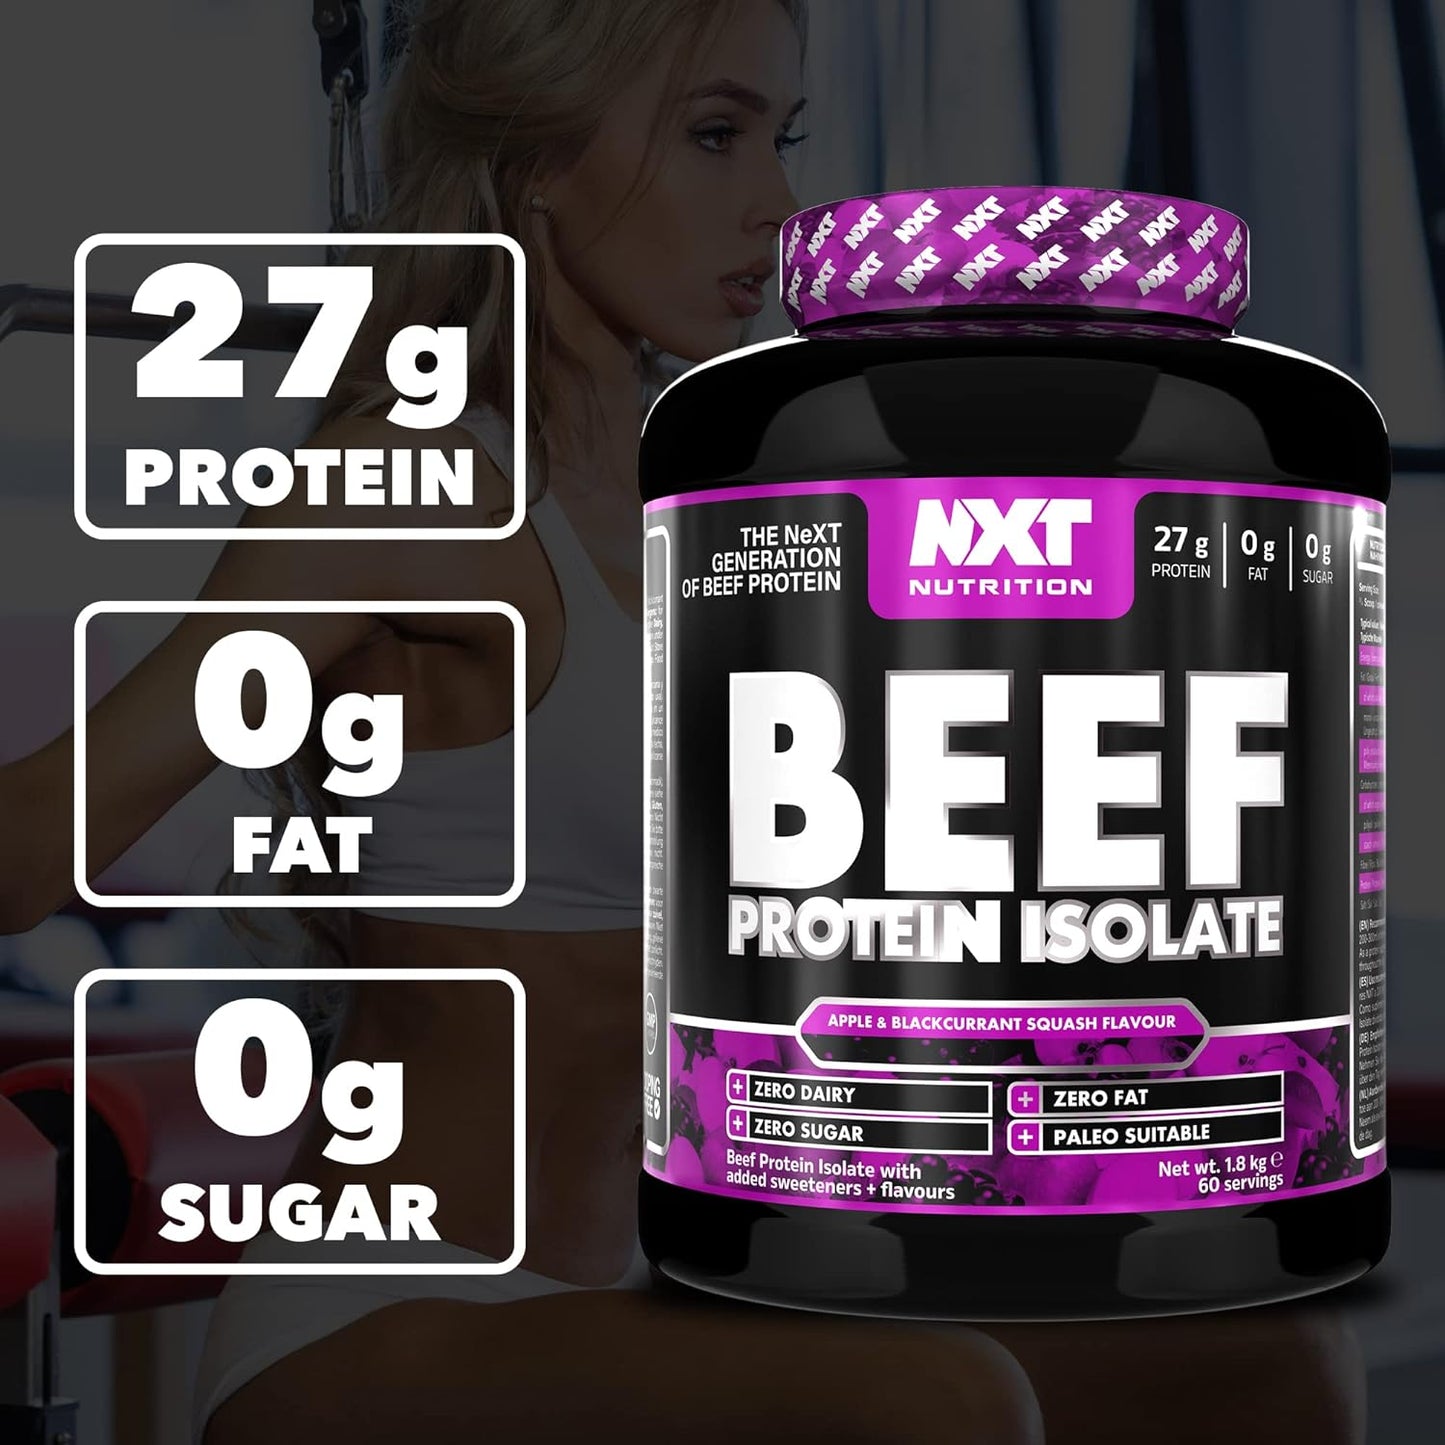 Beef Protein Isolate Powder - Protein Powder High in Natural Amino Acids - Paleo, Keto Friendly - Dairy and Gluten Free - Muscle Recovery | 1.8Kg (Apple & Blackcurrant)